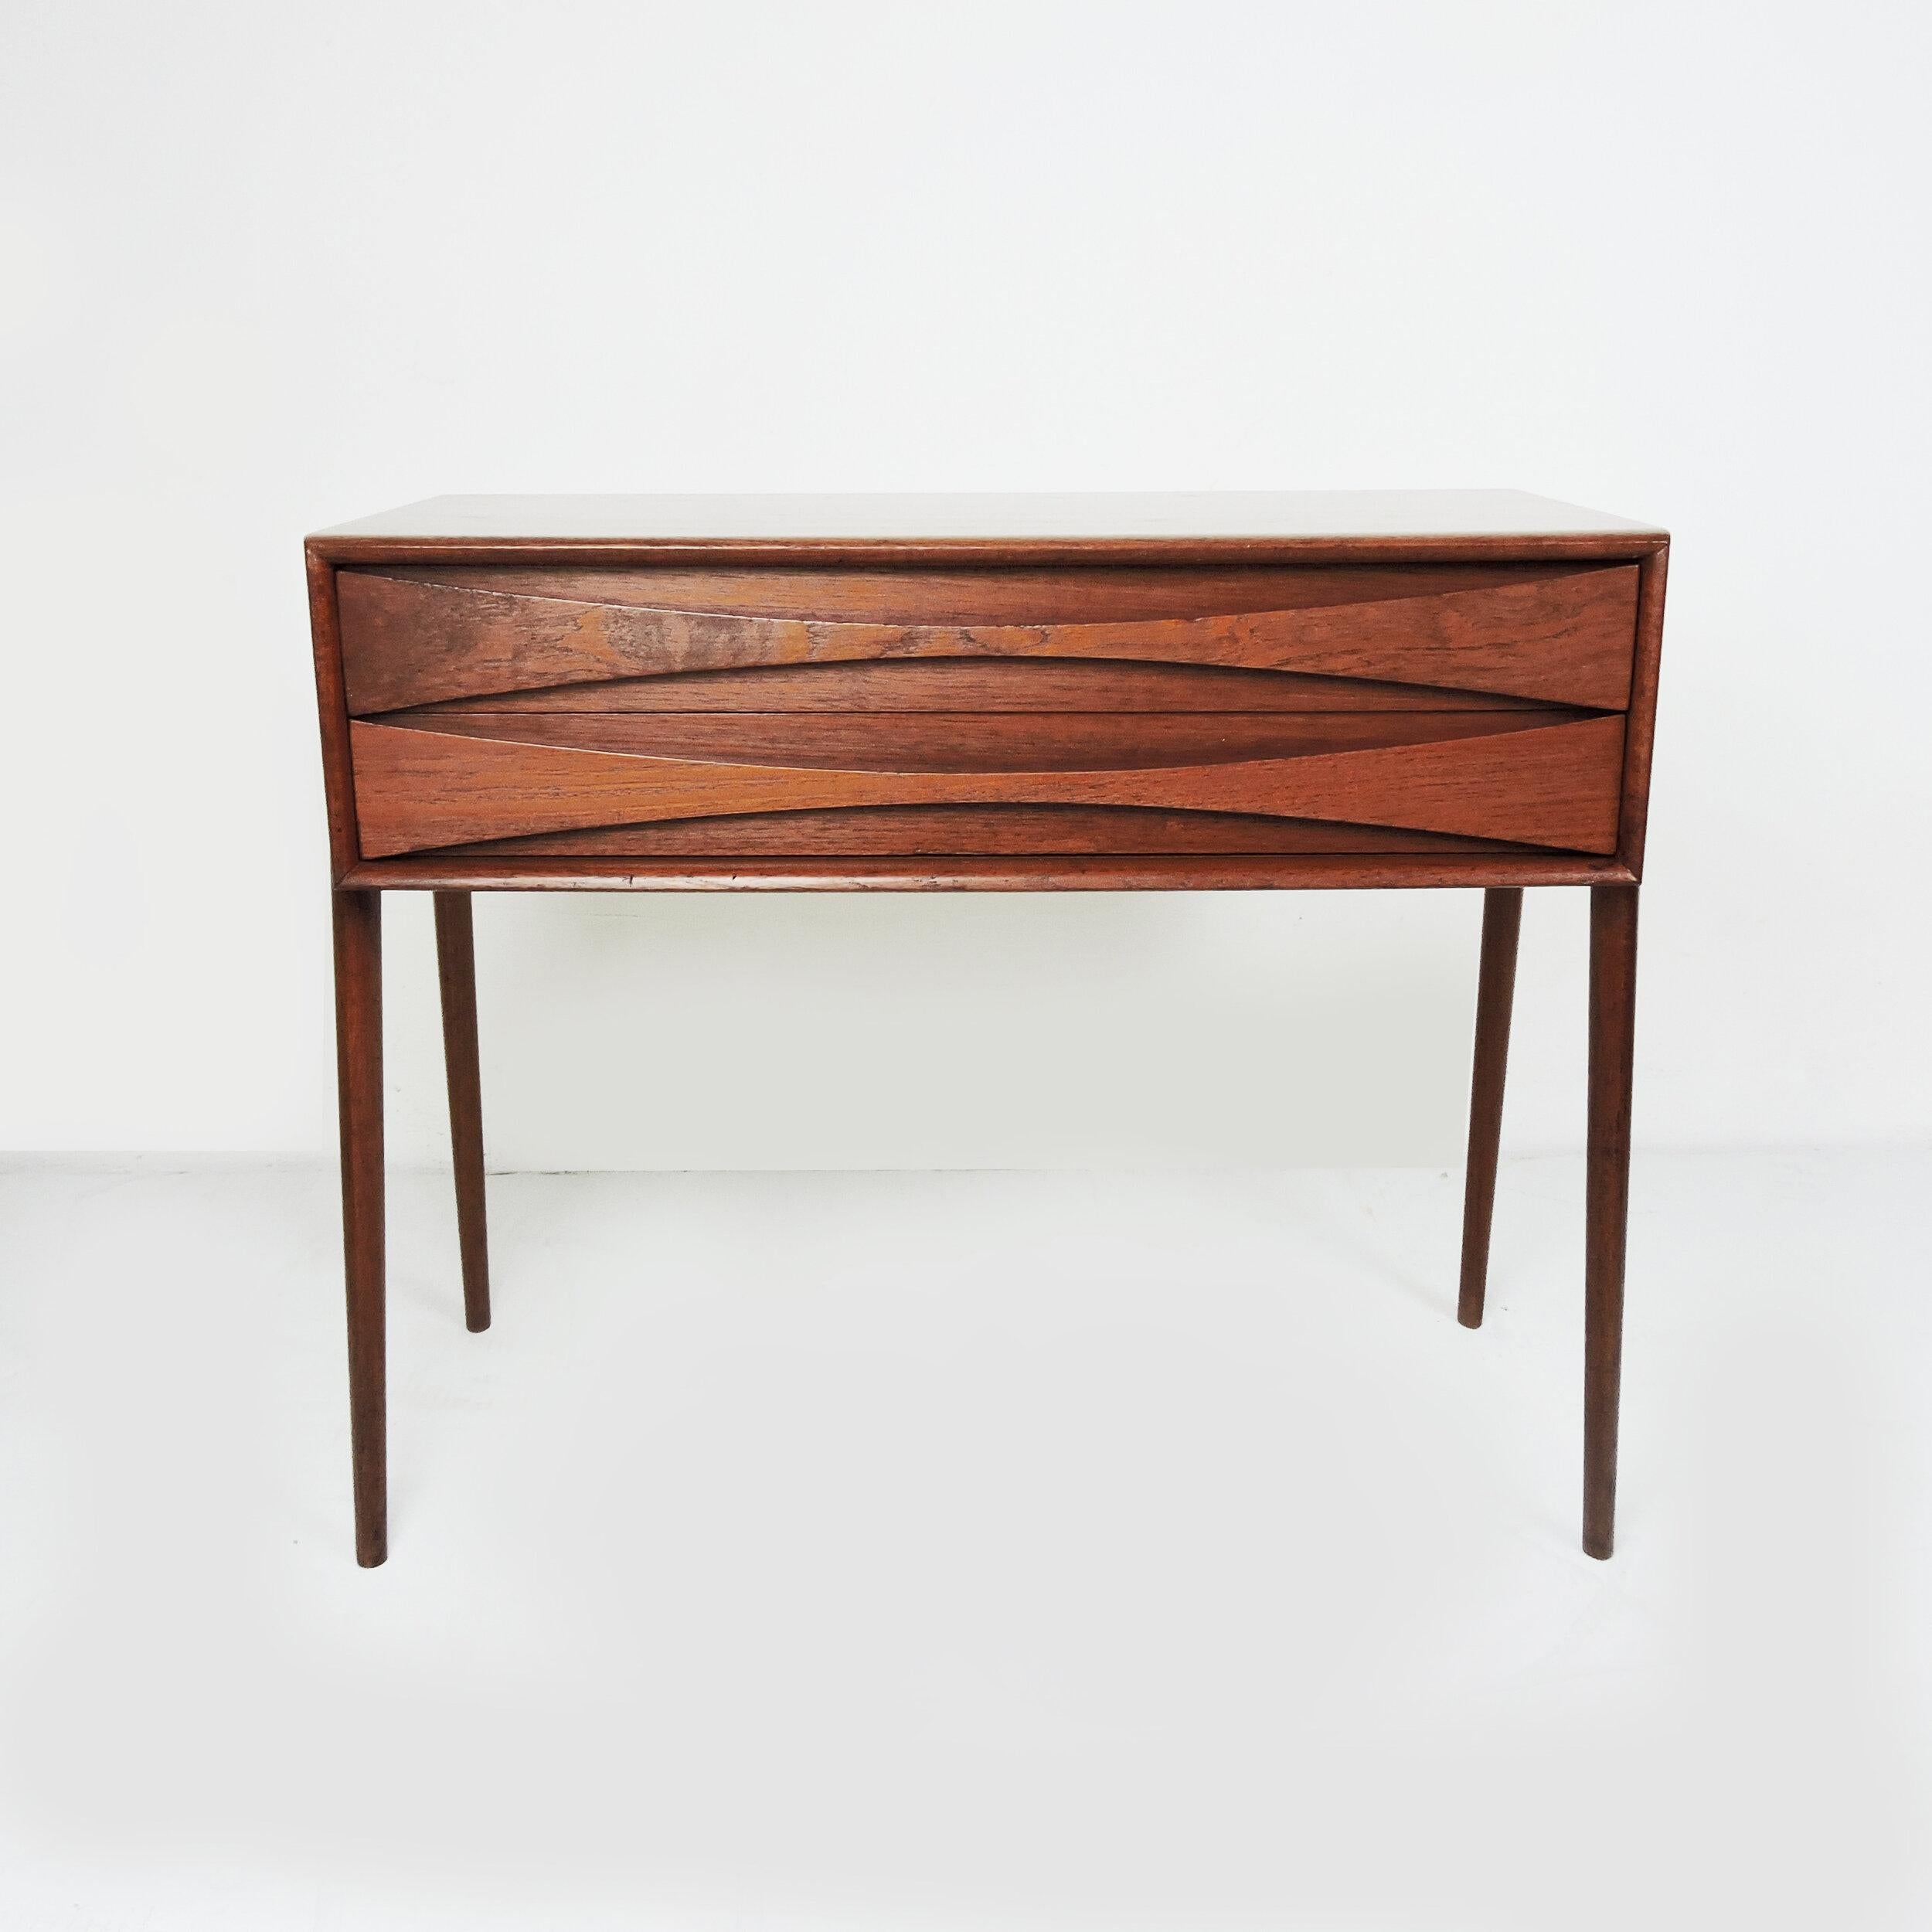 A teak side table by Rimbert Sandholt for Glas & Trä Hovmantorp. It features two decorative drawers with shaped legs.

Designer - Rimbert Sandholt

Manufacturer - Glas & Trä Hovmantorp

Design Period - 1960 to 1969

Country of Manufacture -